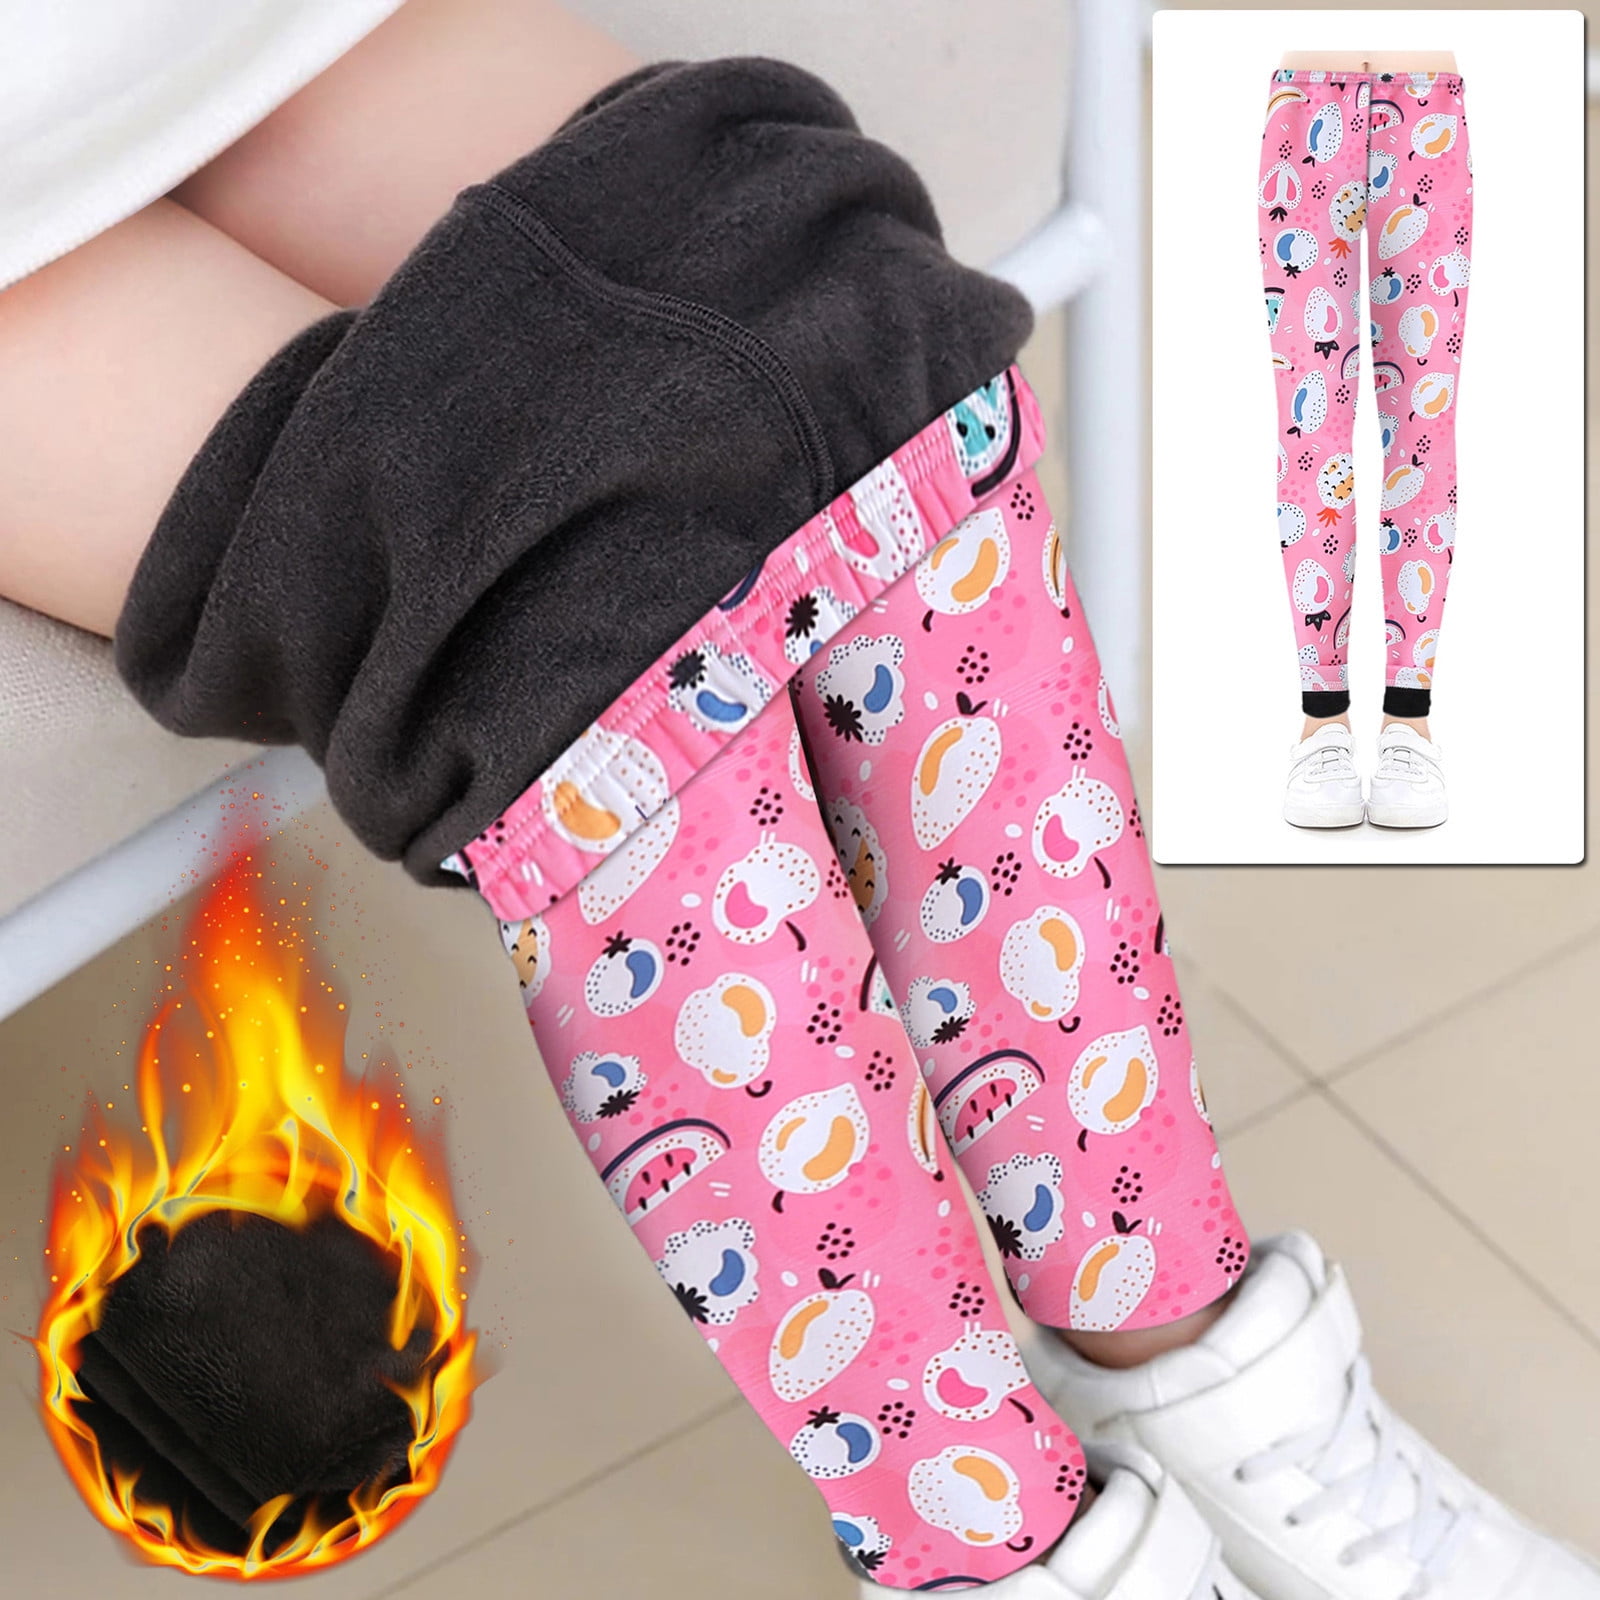  Infant Pants Clothes Pants Sweet Children Slim Leggings Girls  Spring Autumn Clothing Cotton-Blend (Dark Blue, 2-3 Years): Clothing, Shoes  & Jewelry